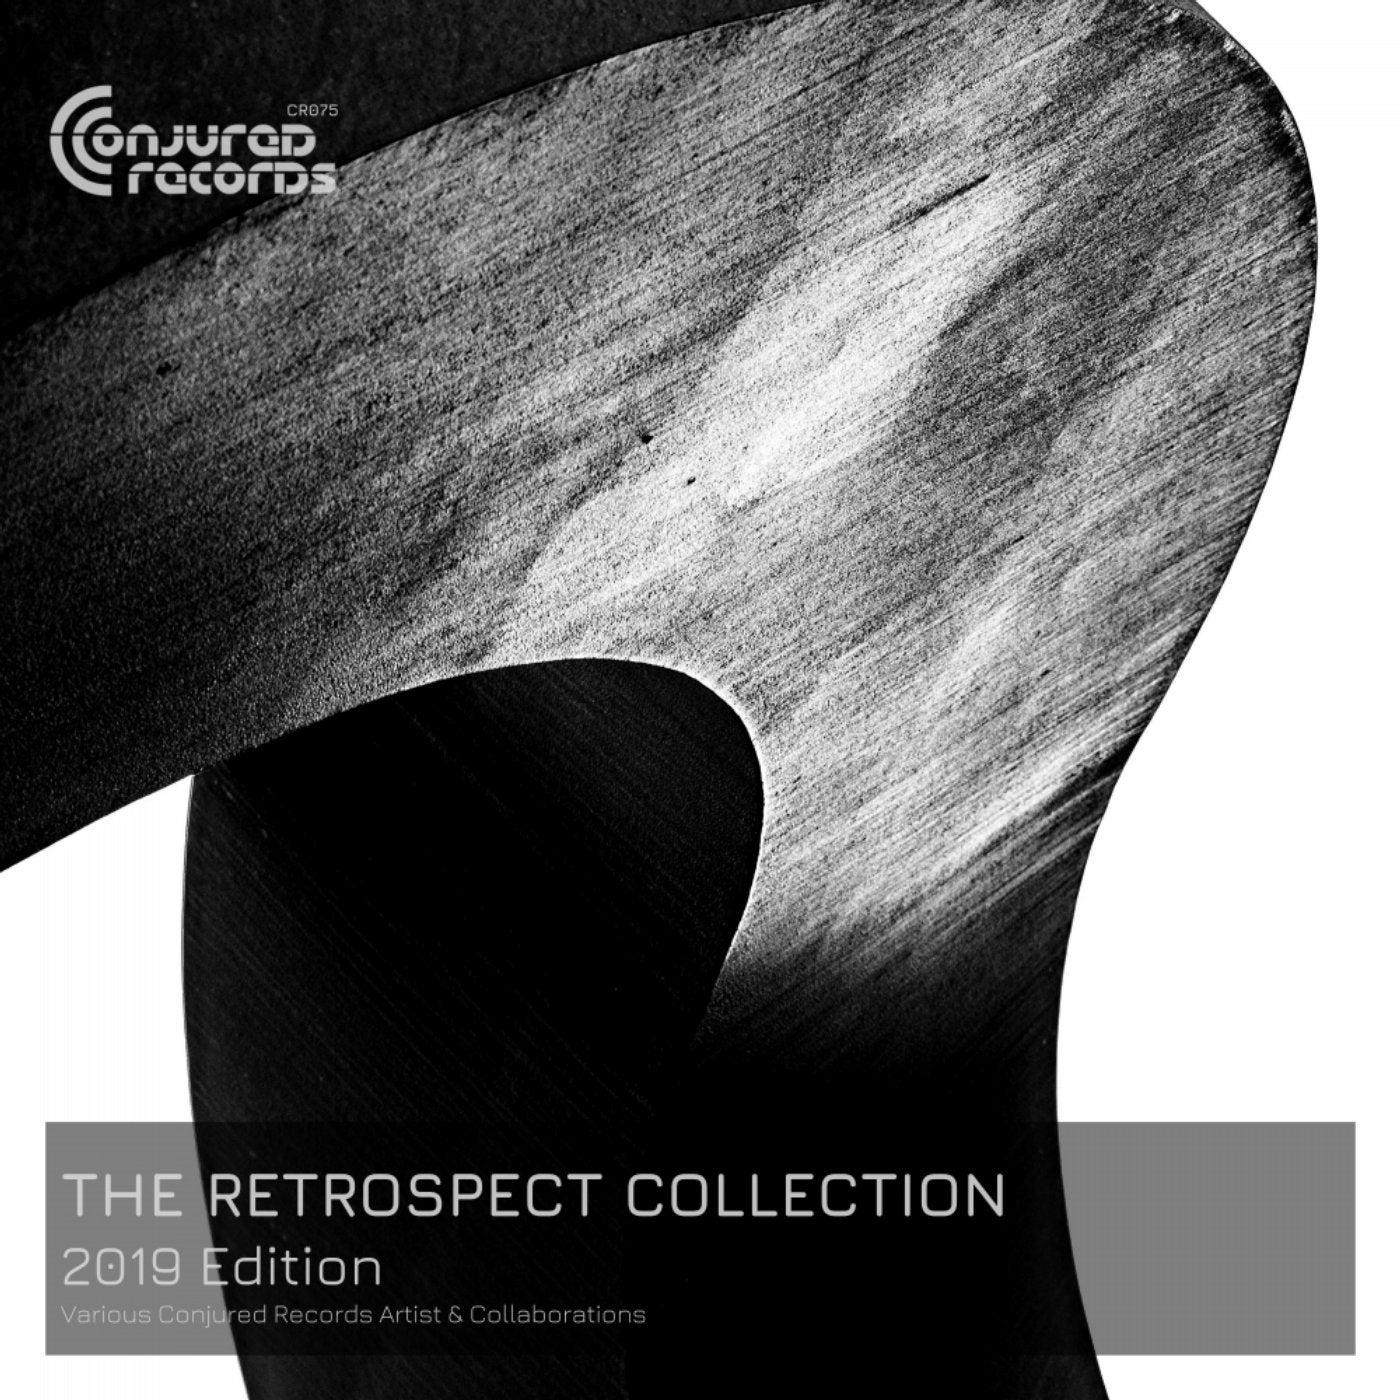 The Retrospect Collection - 2019 Edition